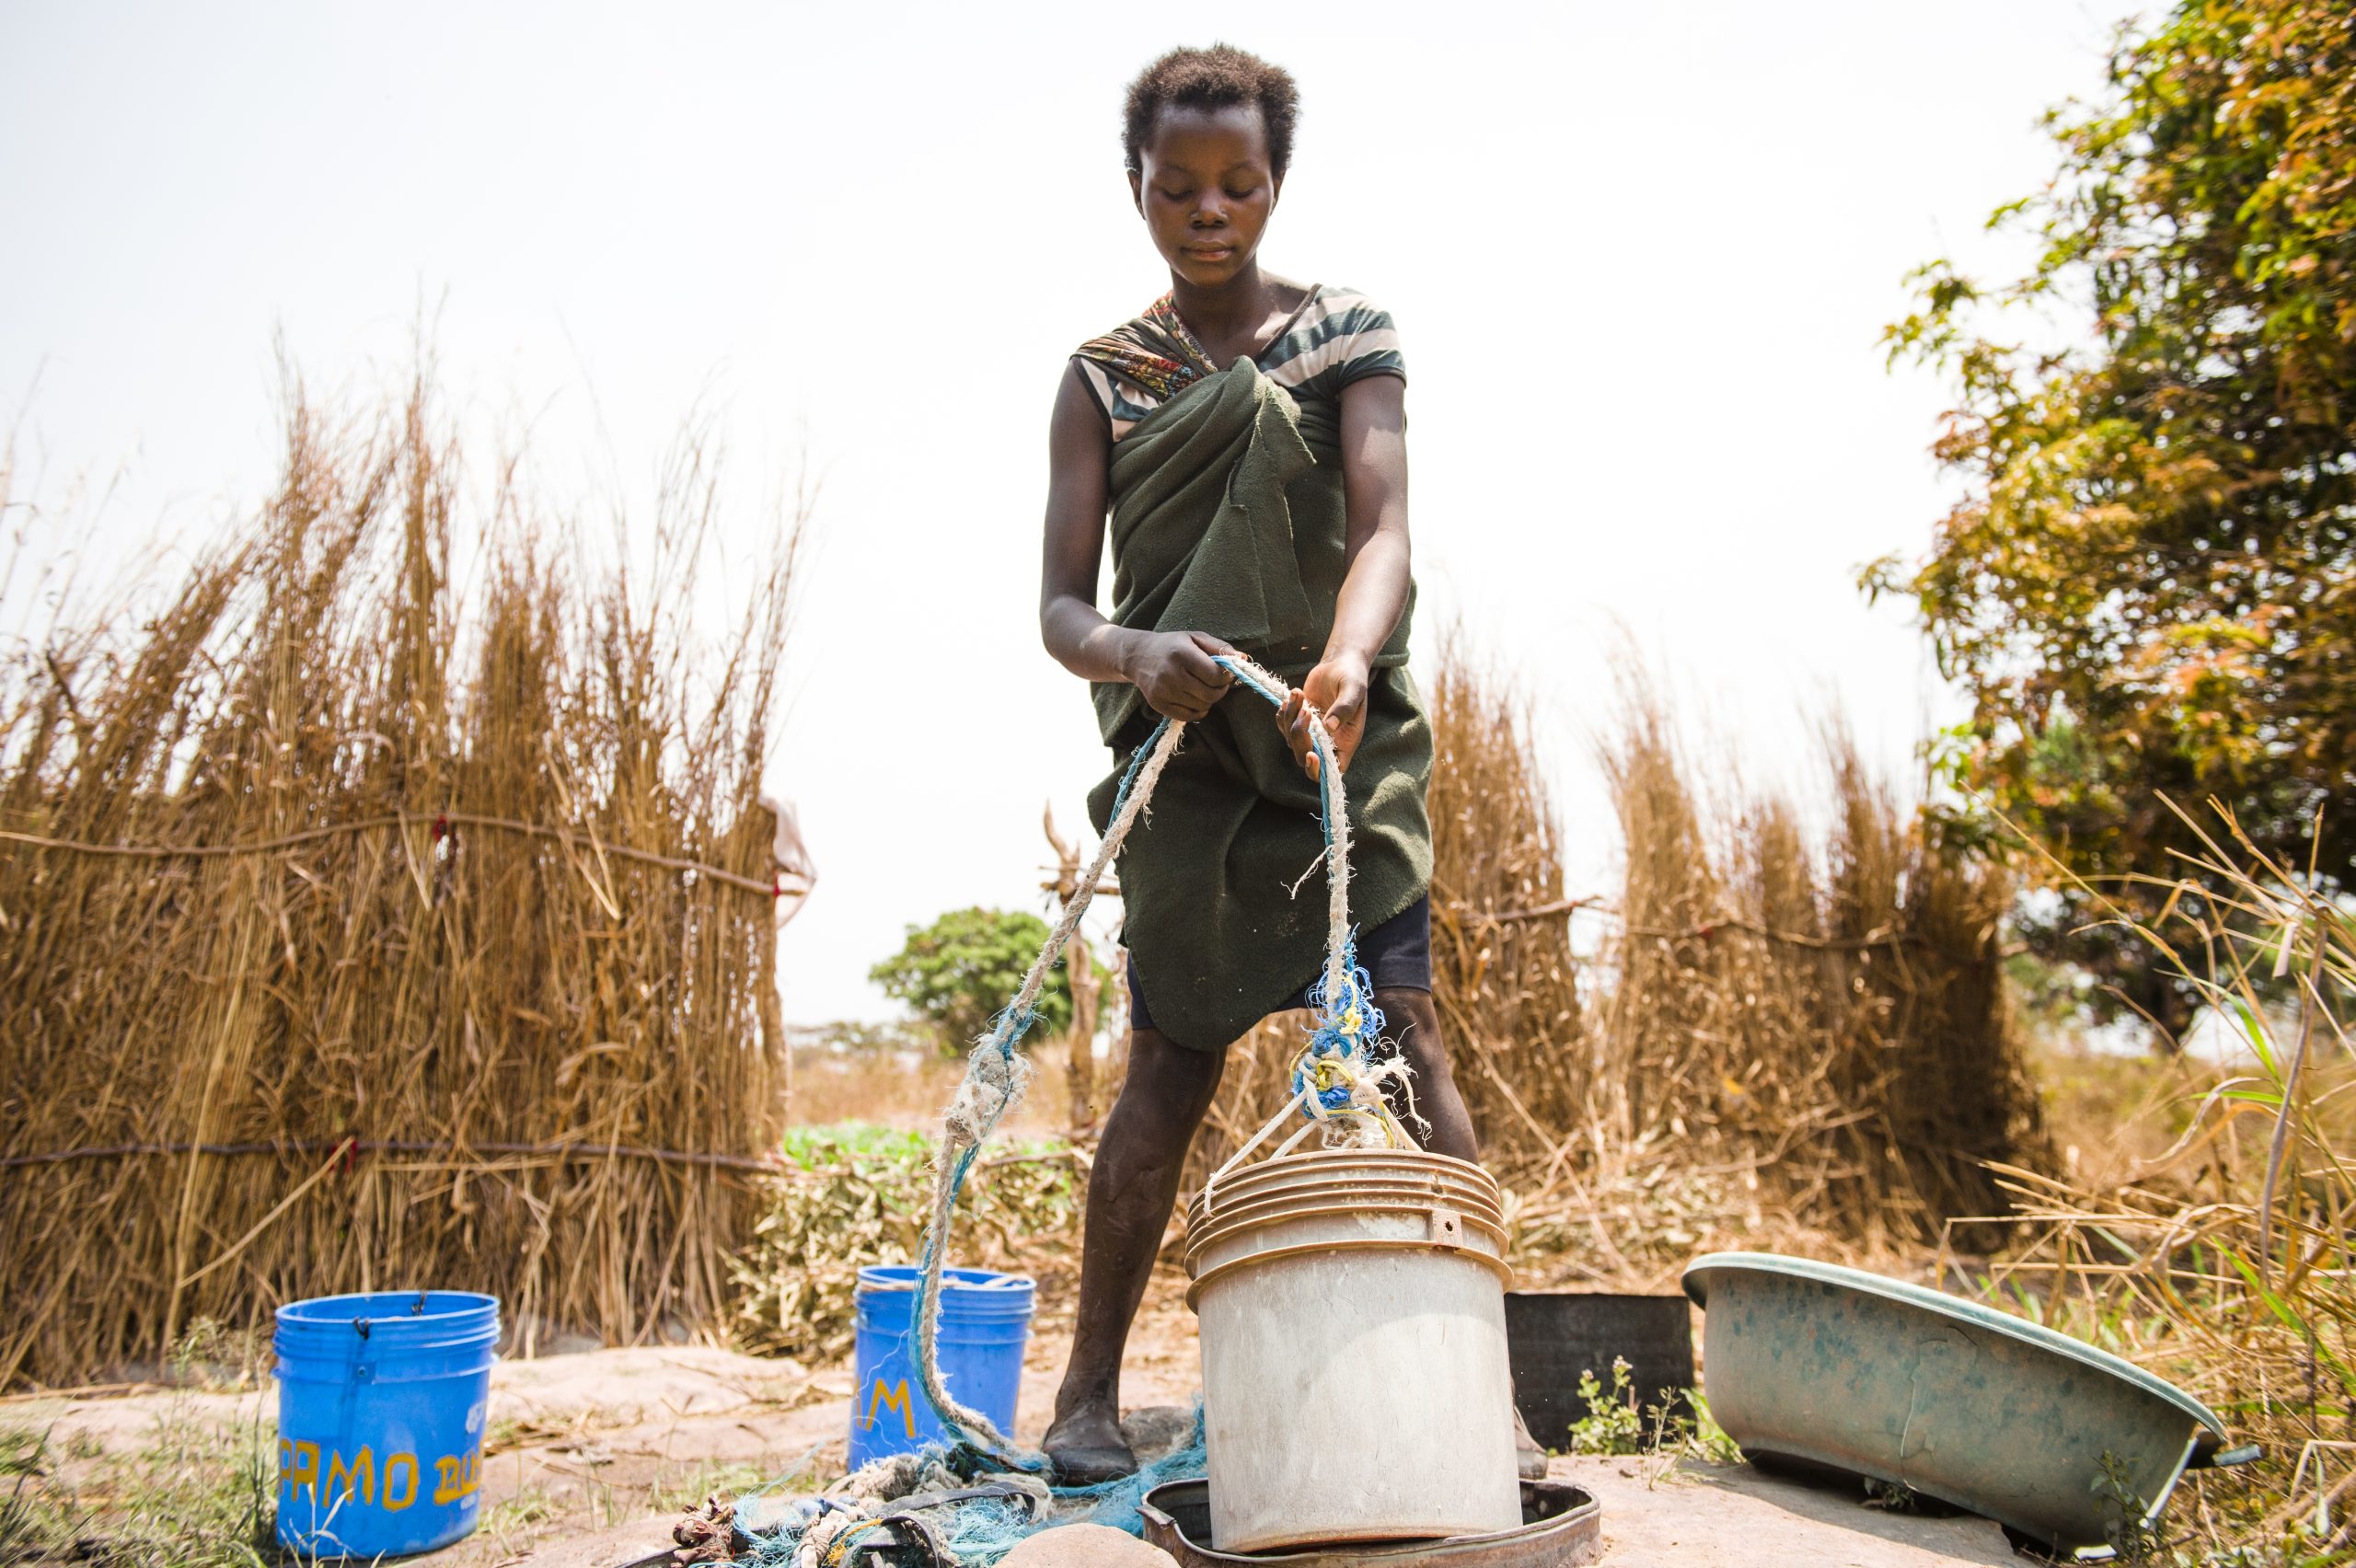 A child bridge collects water from a well, Zambia